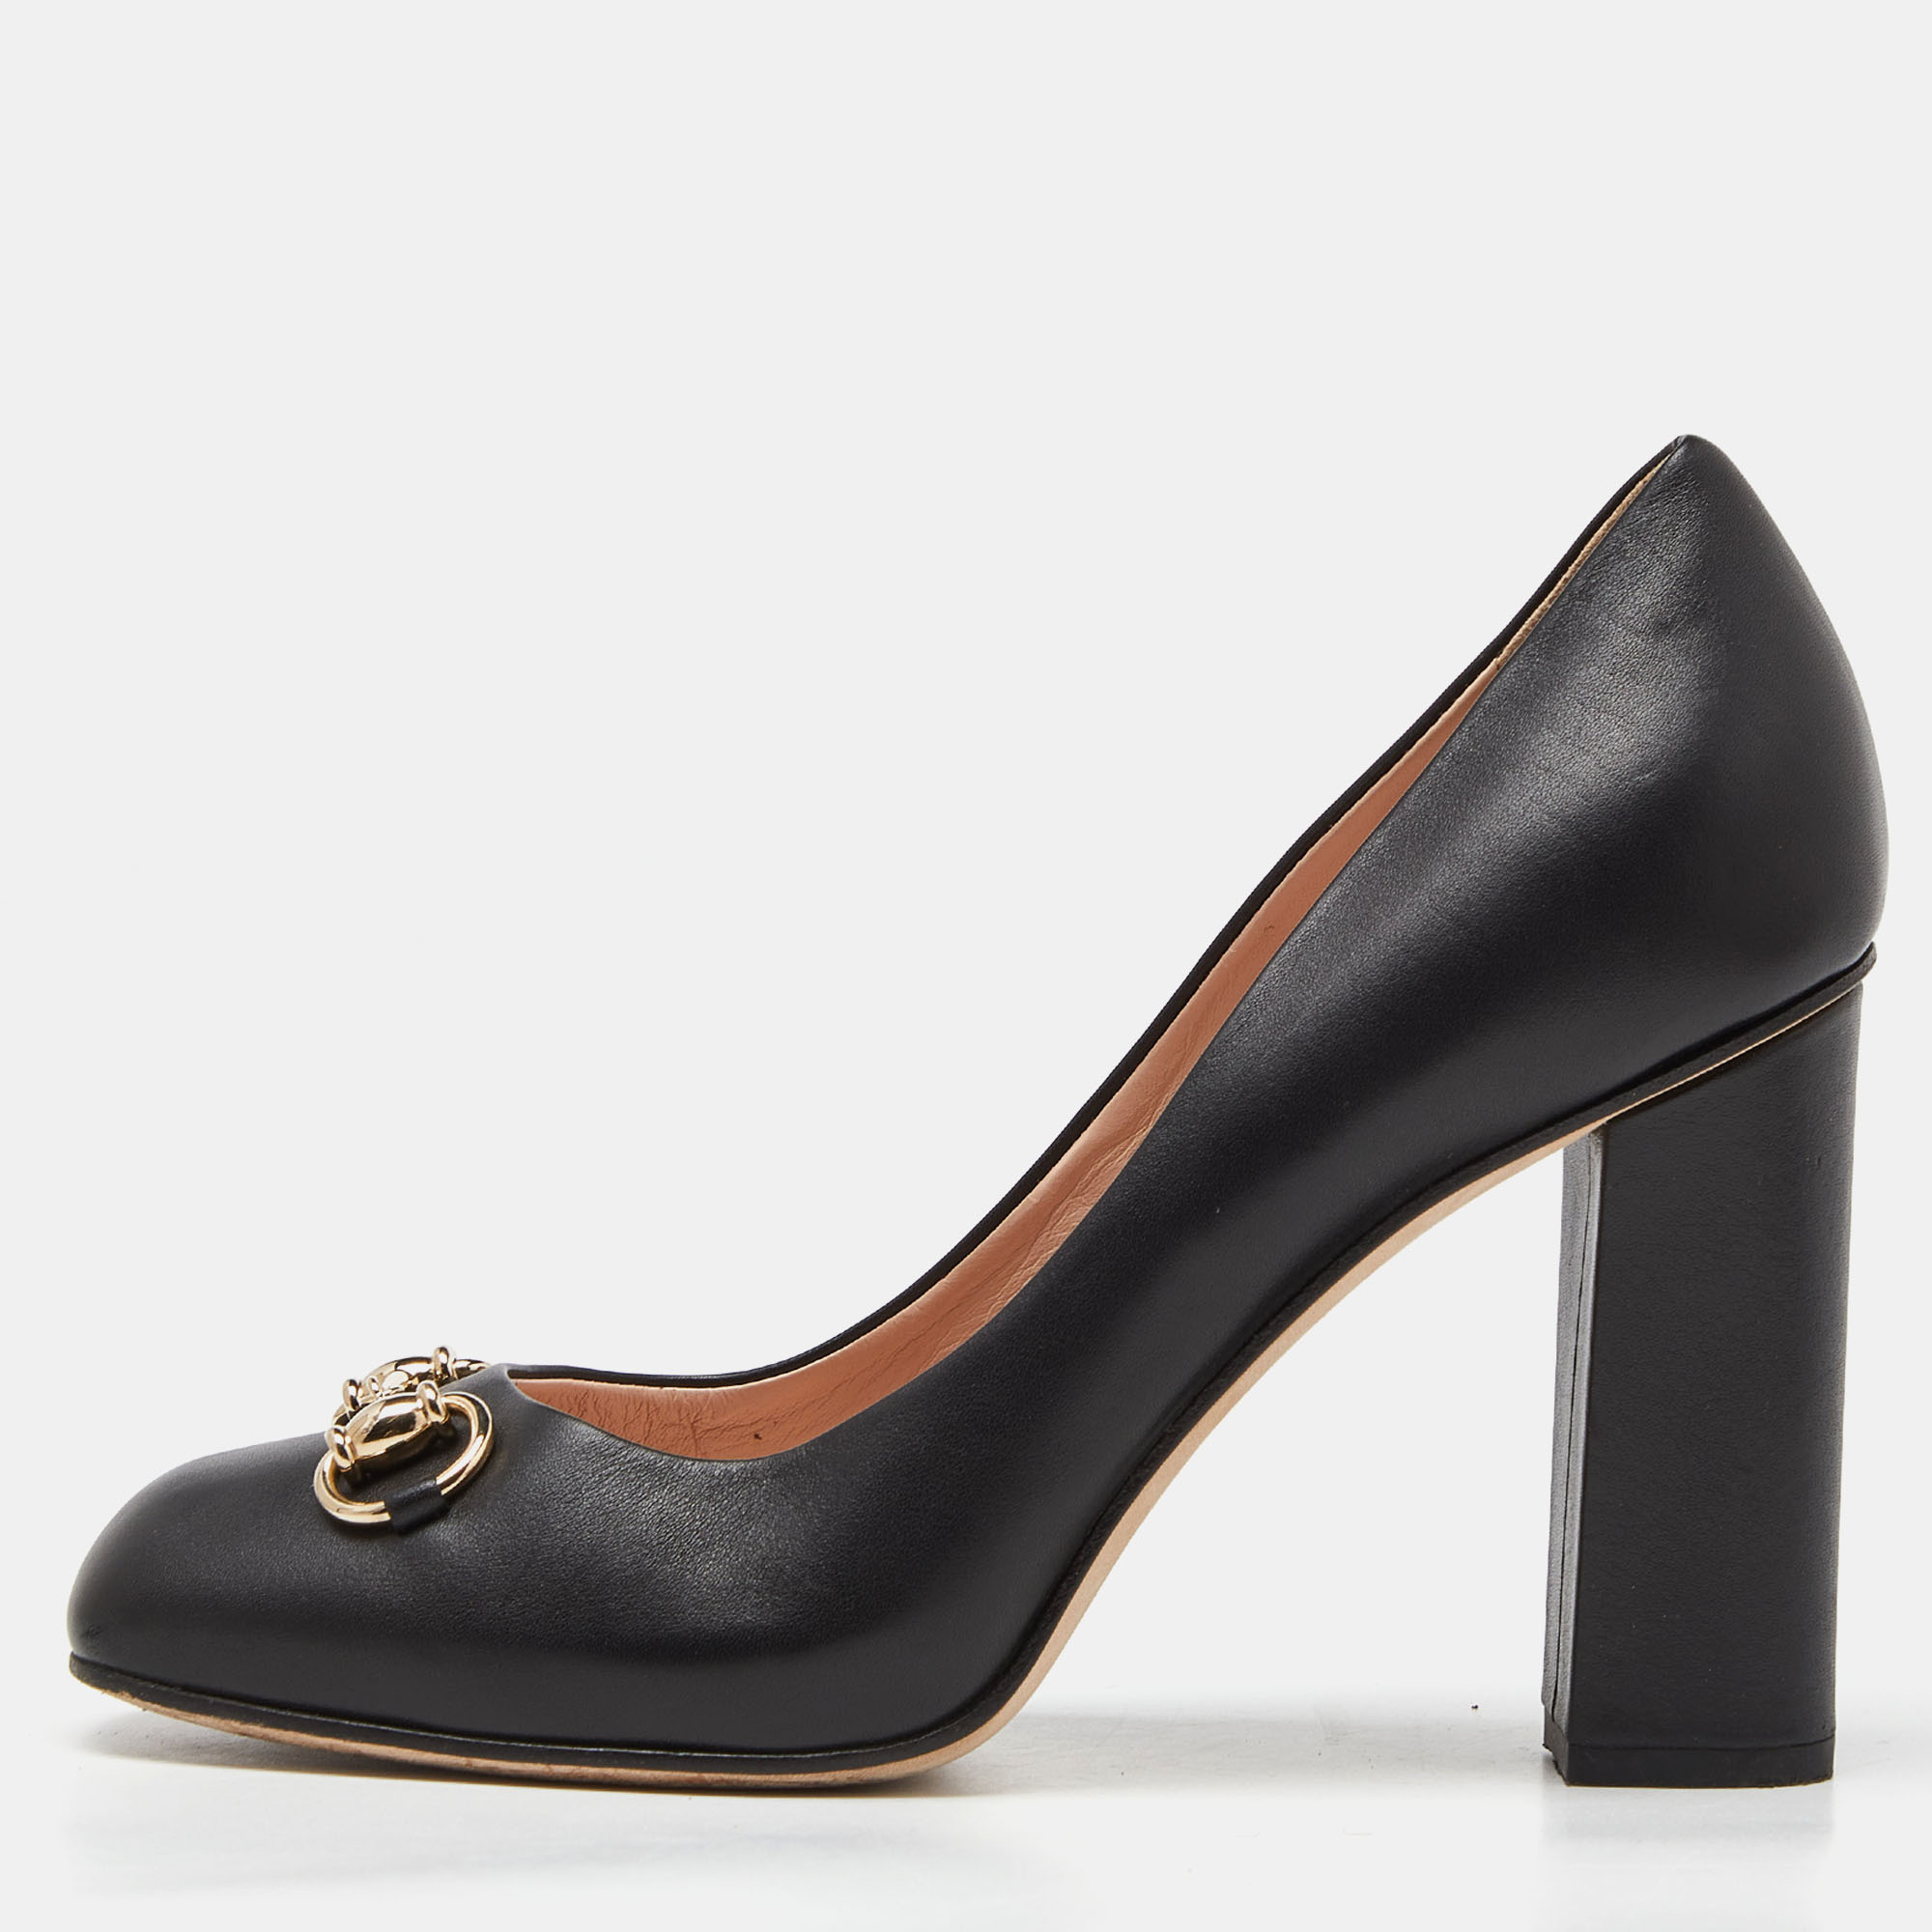 Grace and poise will all come naturally to you when you step out in this pair of pumps from Gucci. Crafted from black leather the square toe pumps have been styled with 10cm block heels and the iconic Horsebit detail on the uppers. They are finished with gold tone hardware and leather soles.